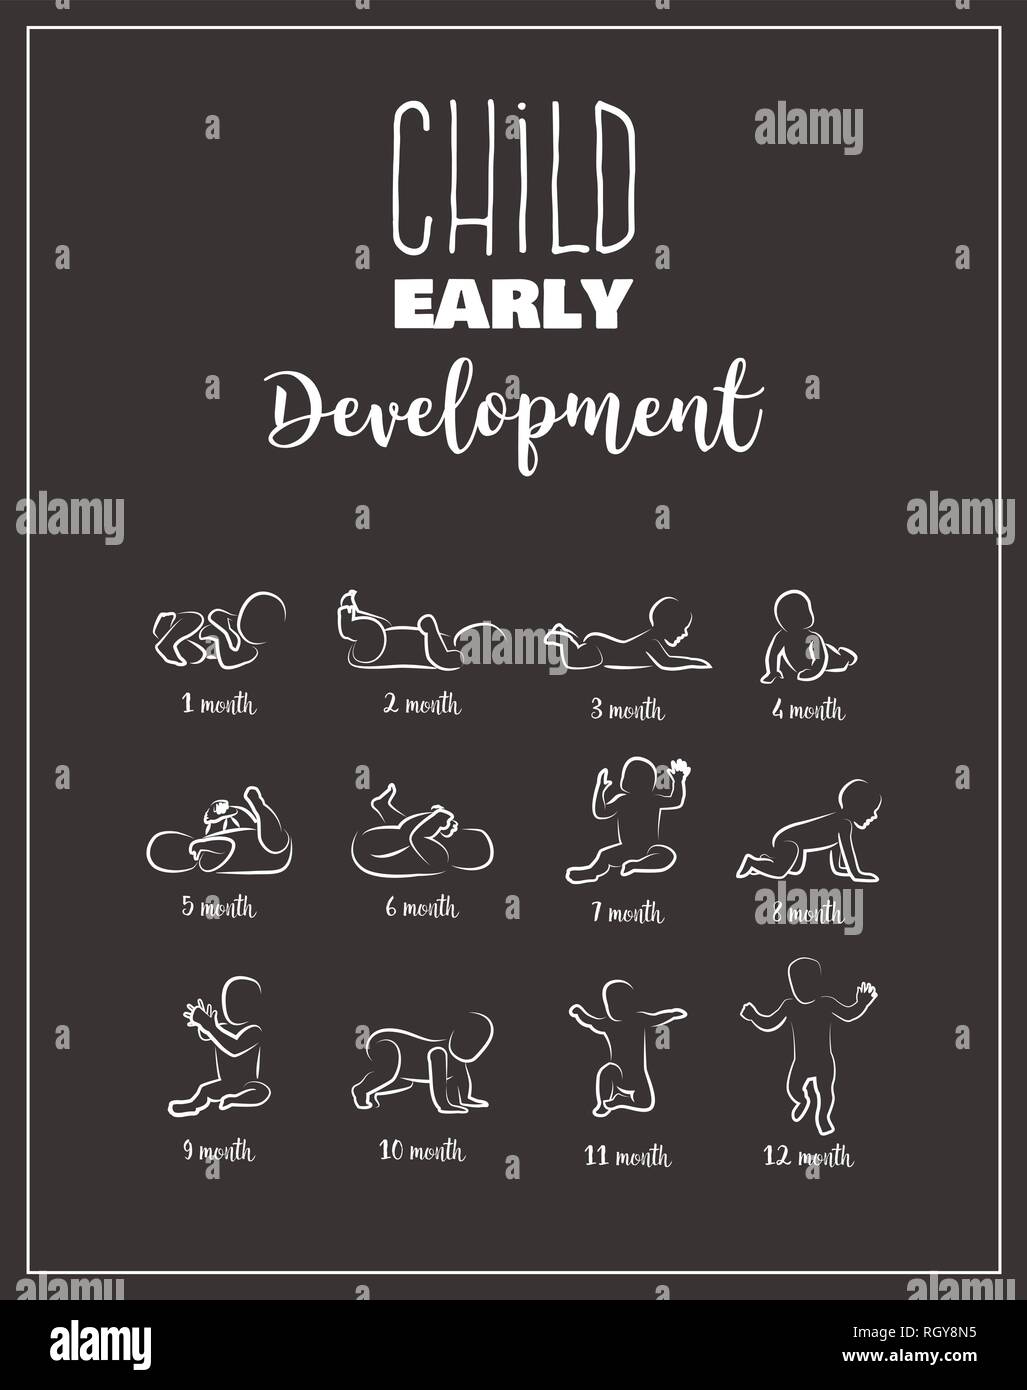 Baby Development Stages Milestones First One Year . Child milestones of first year. vector illustration Stock Vector